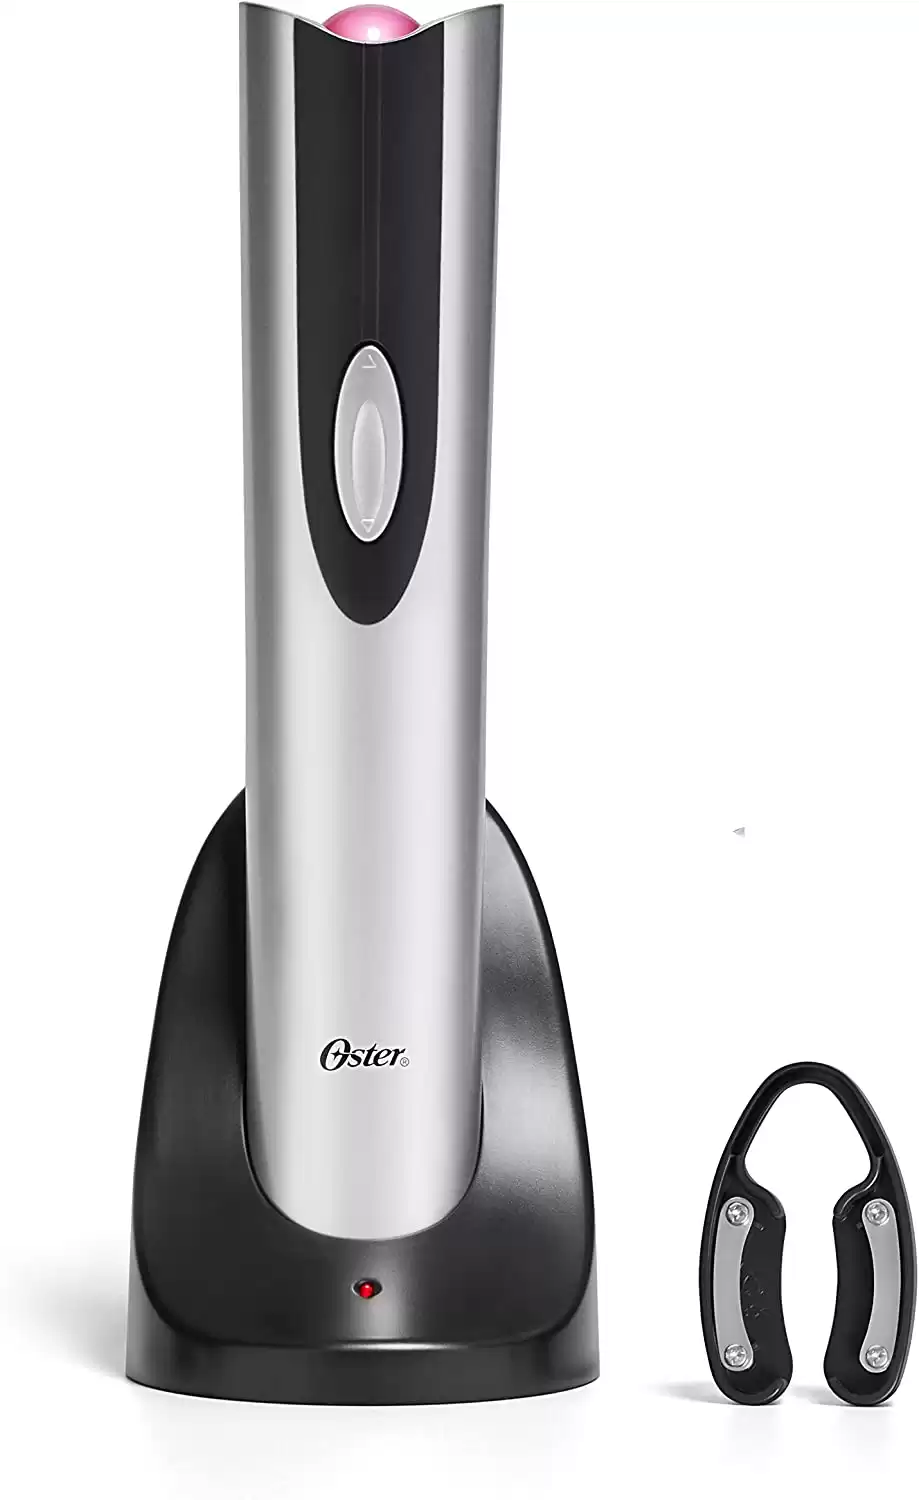 Oster Electric Wine Opener and Foil Cutter Kit with CorkScrew and Charging Base